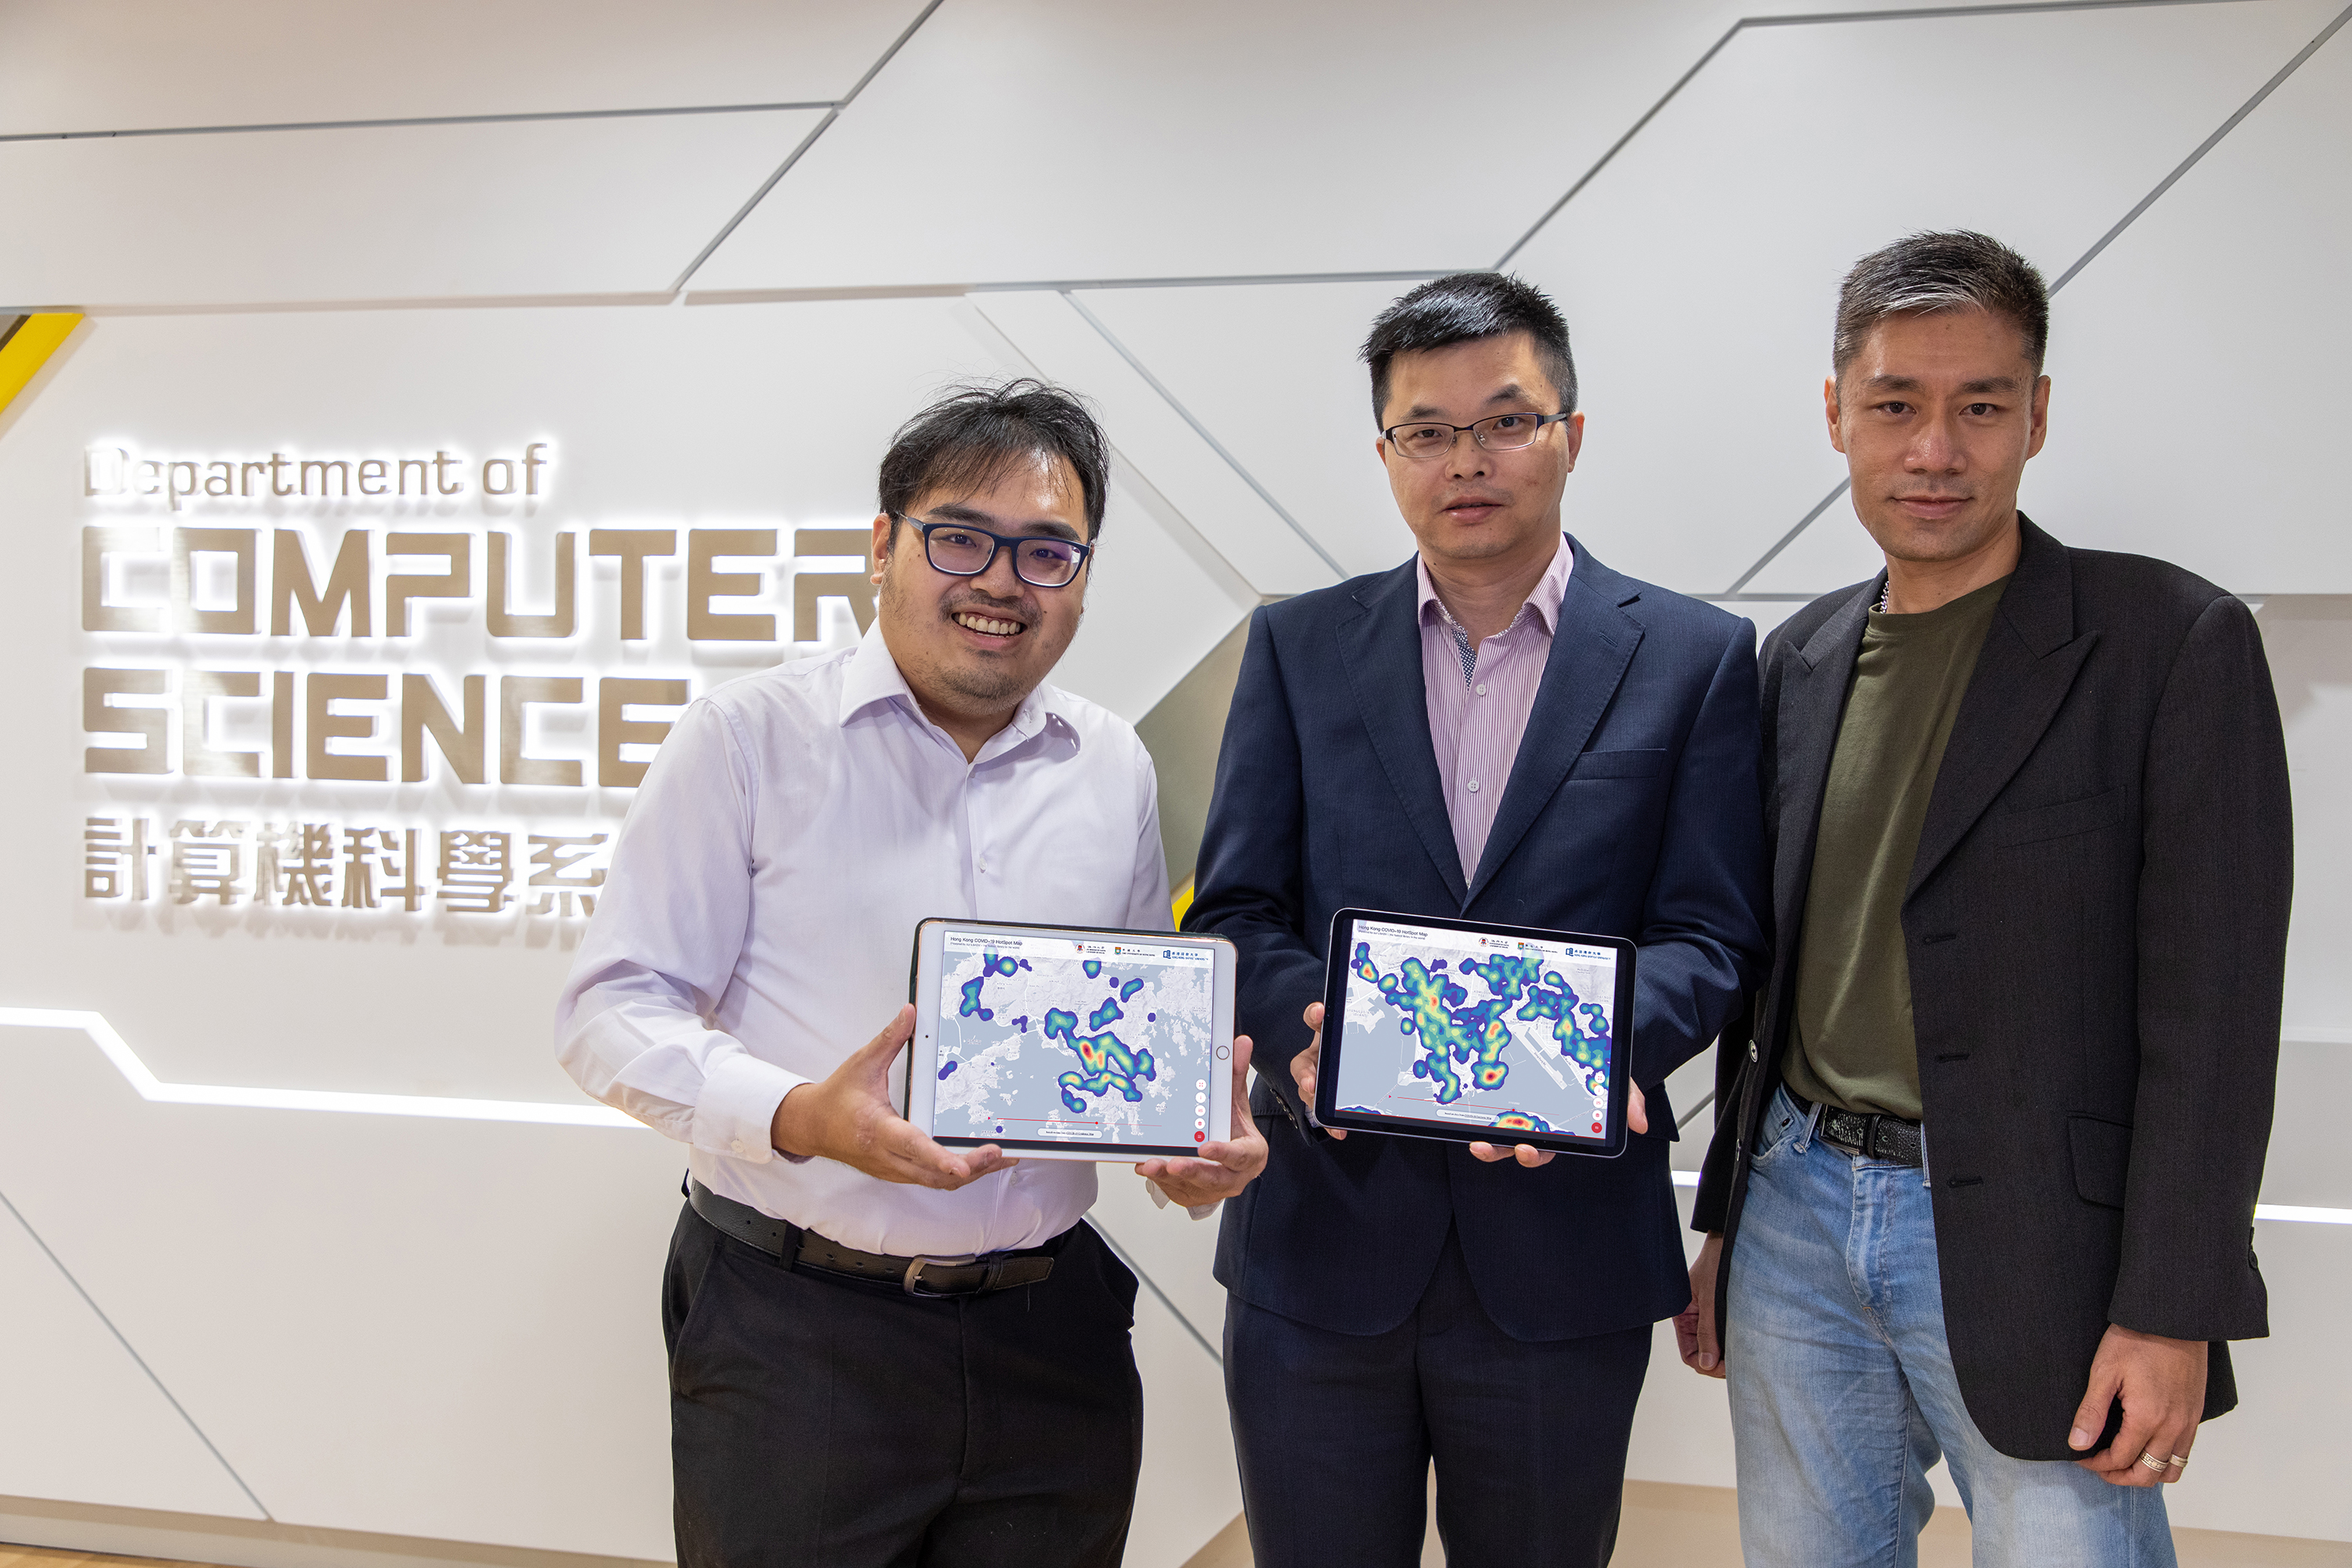 The research team is led by Professor Xu Jianliang, Head of the Department of Computer Science (middle). Other HKBU scholars in the team include Professor Byron Choi Koon-kau, Associate Head (right) and Dr Chan Tsz-nam, Research Assistant Professor of the Department of Computer Science (left).